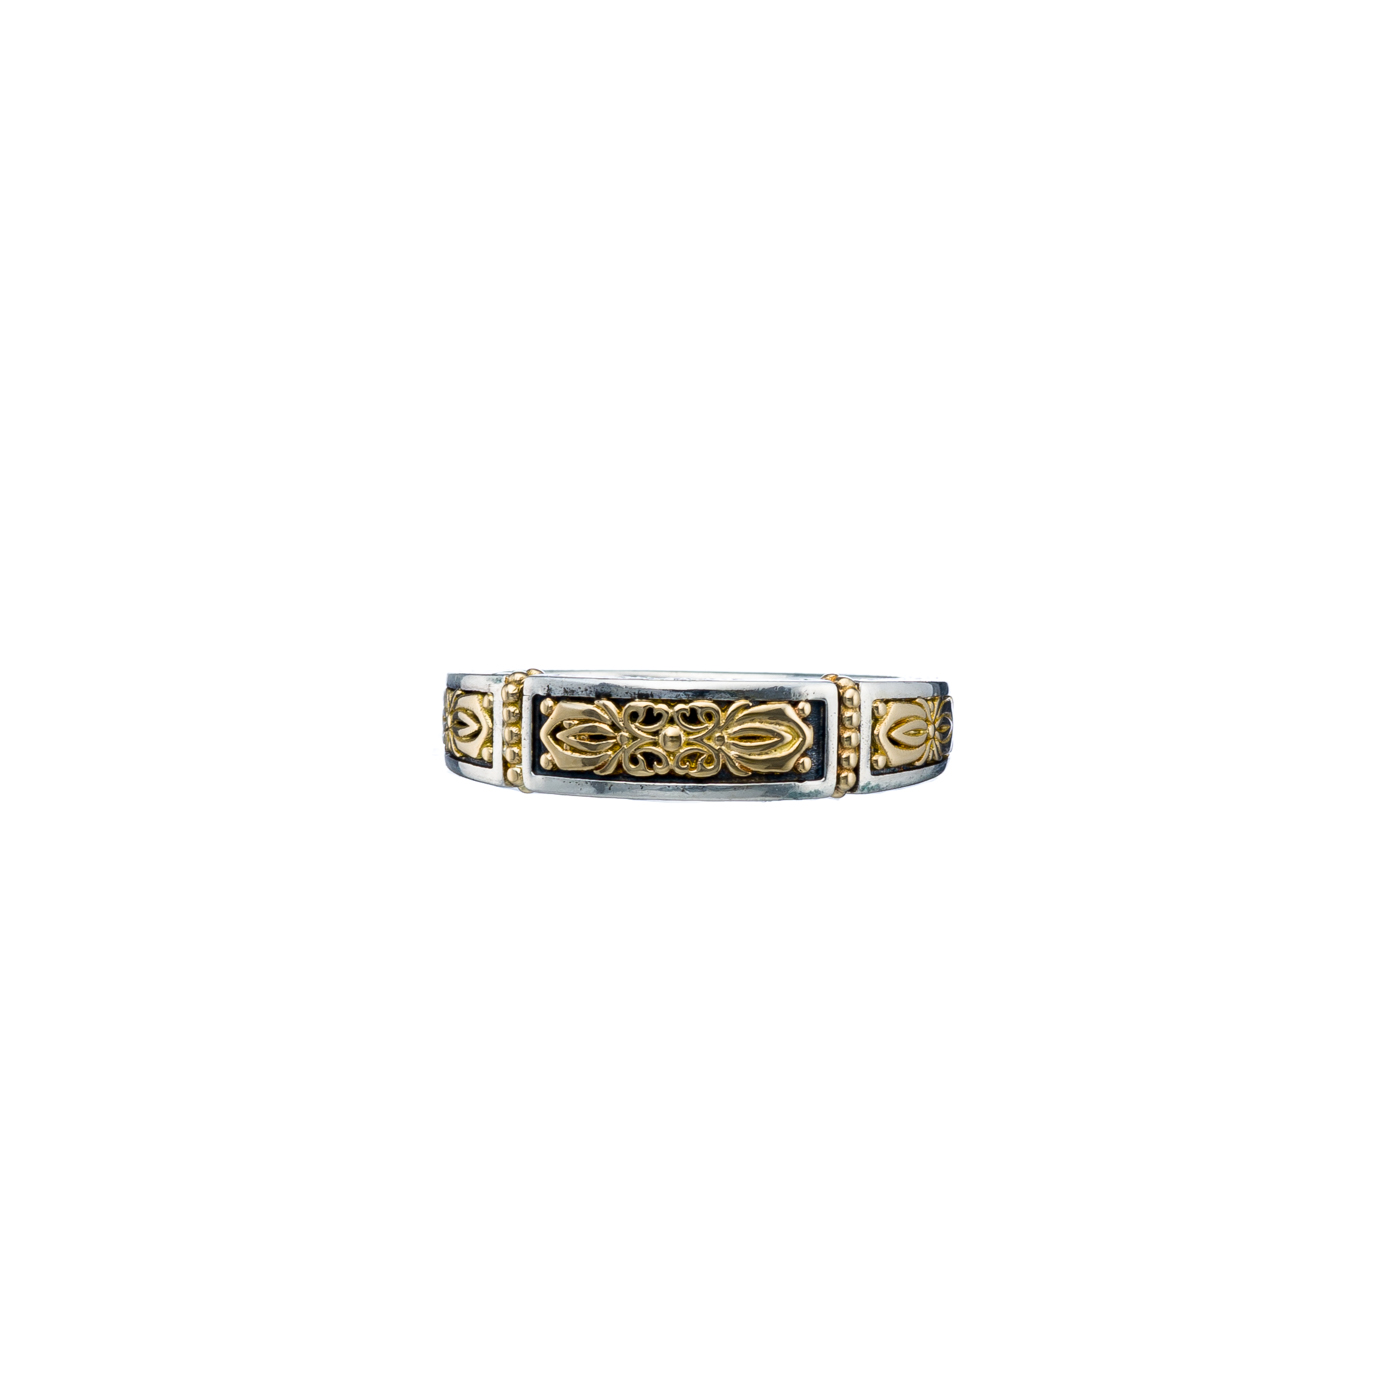 Erotokritos band ring in 18K Gold and Sterling silver